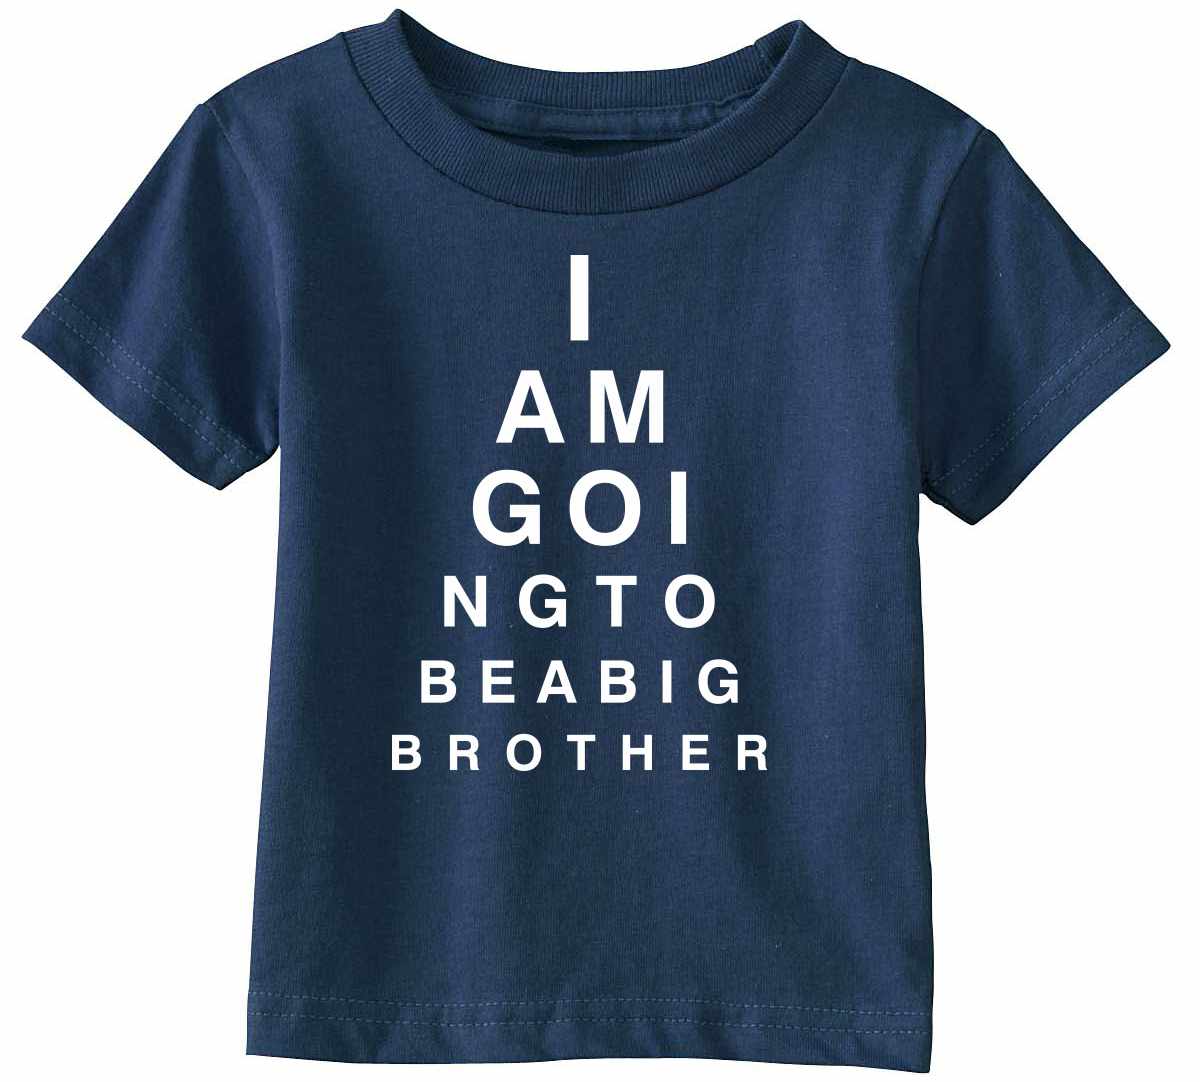 I AM GOING TO BE BIG BROTHER EYE CHART Infant/Toddler  (#1007-7)